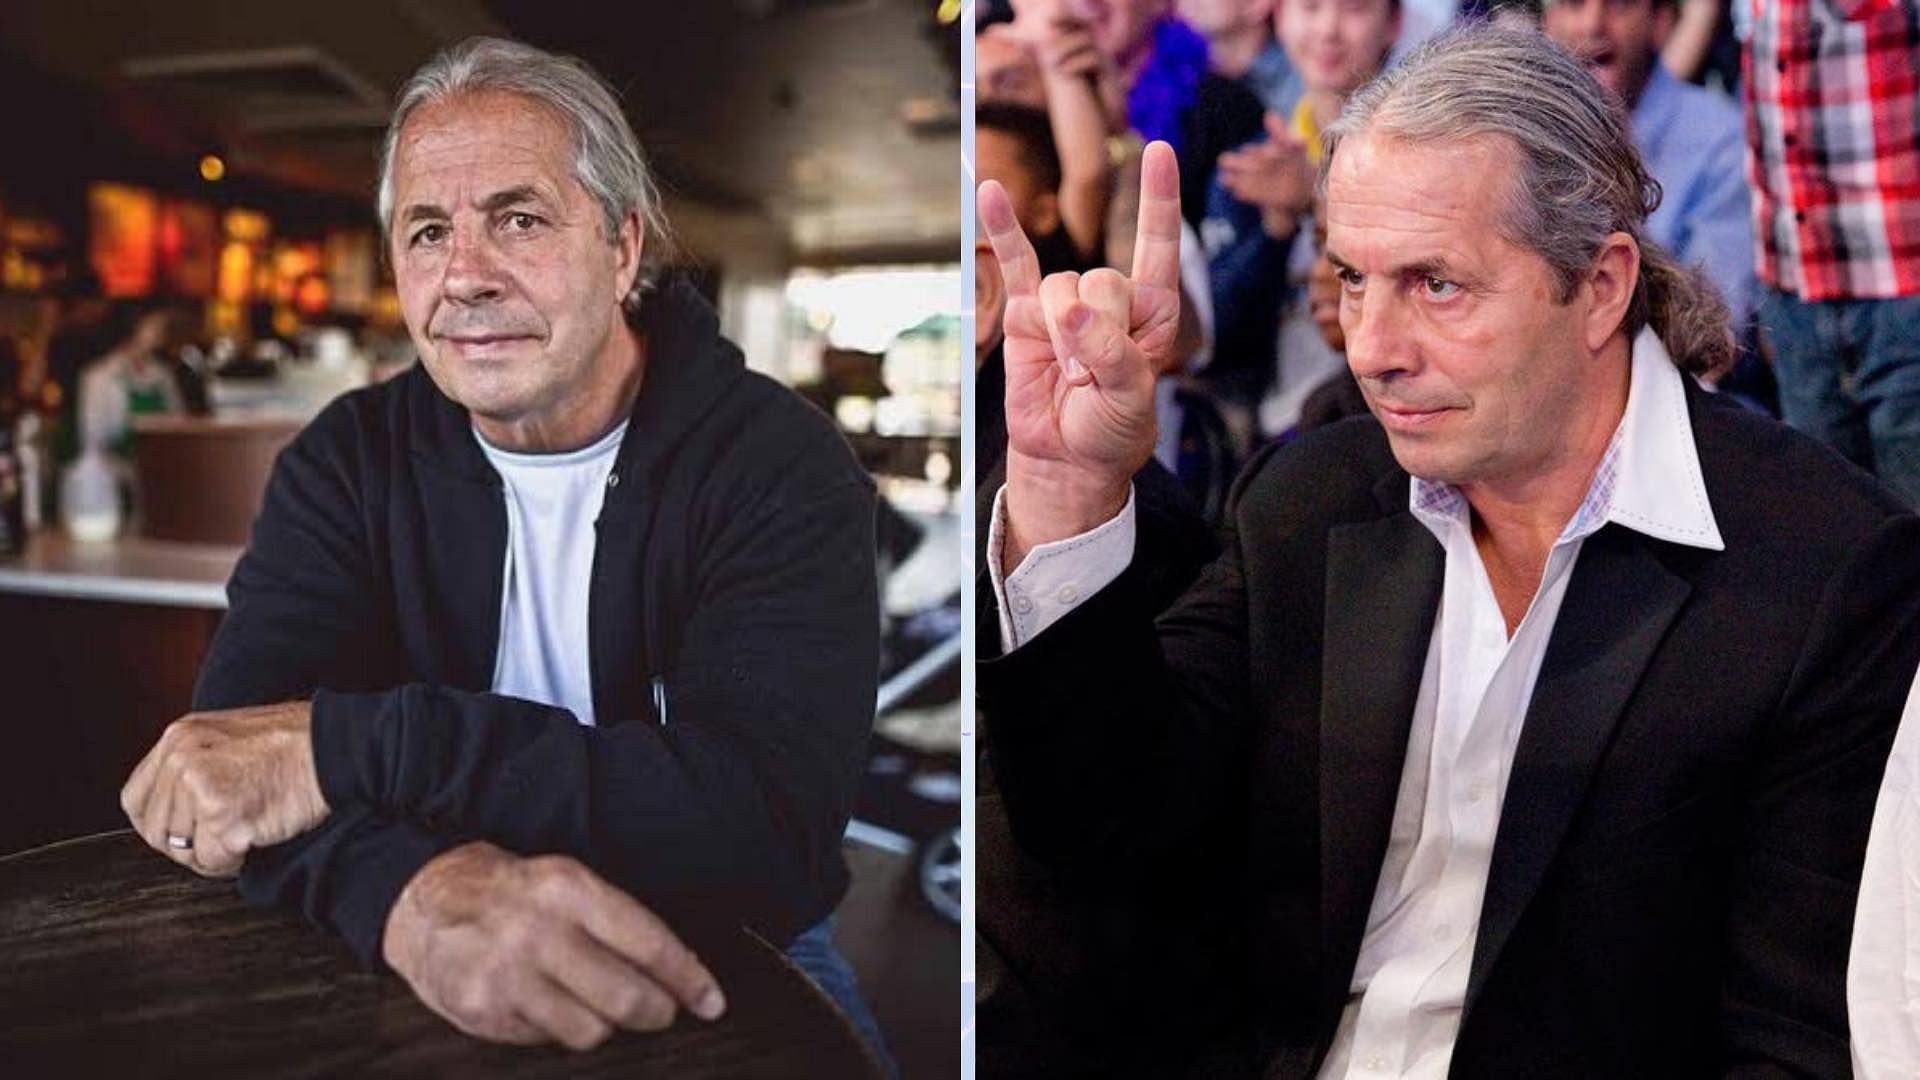 Bret Hart is a WWE Hall of Famer and a grand slam champion.